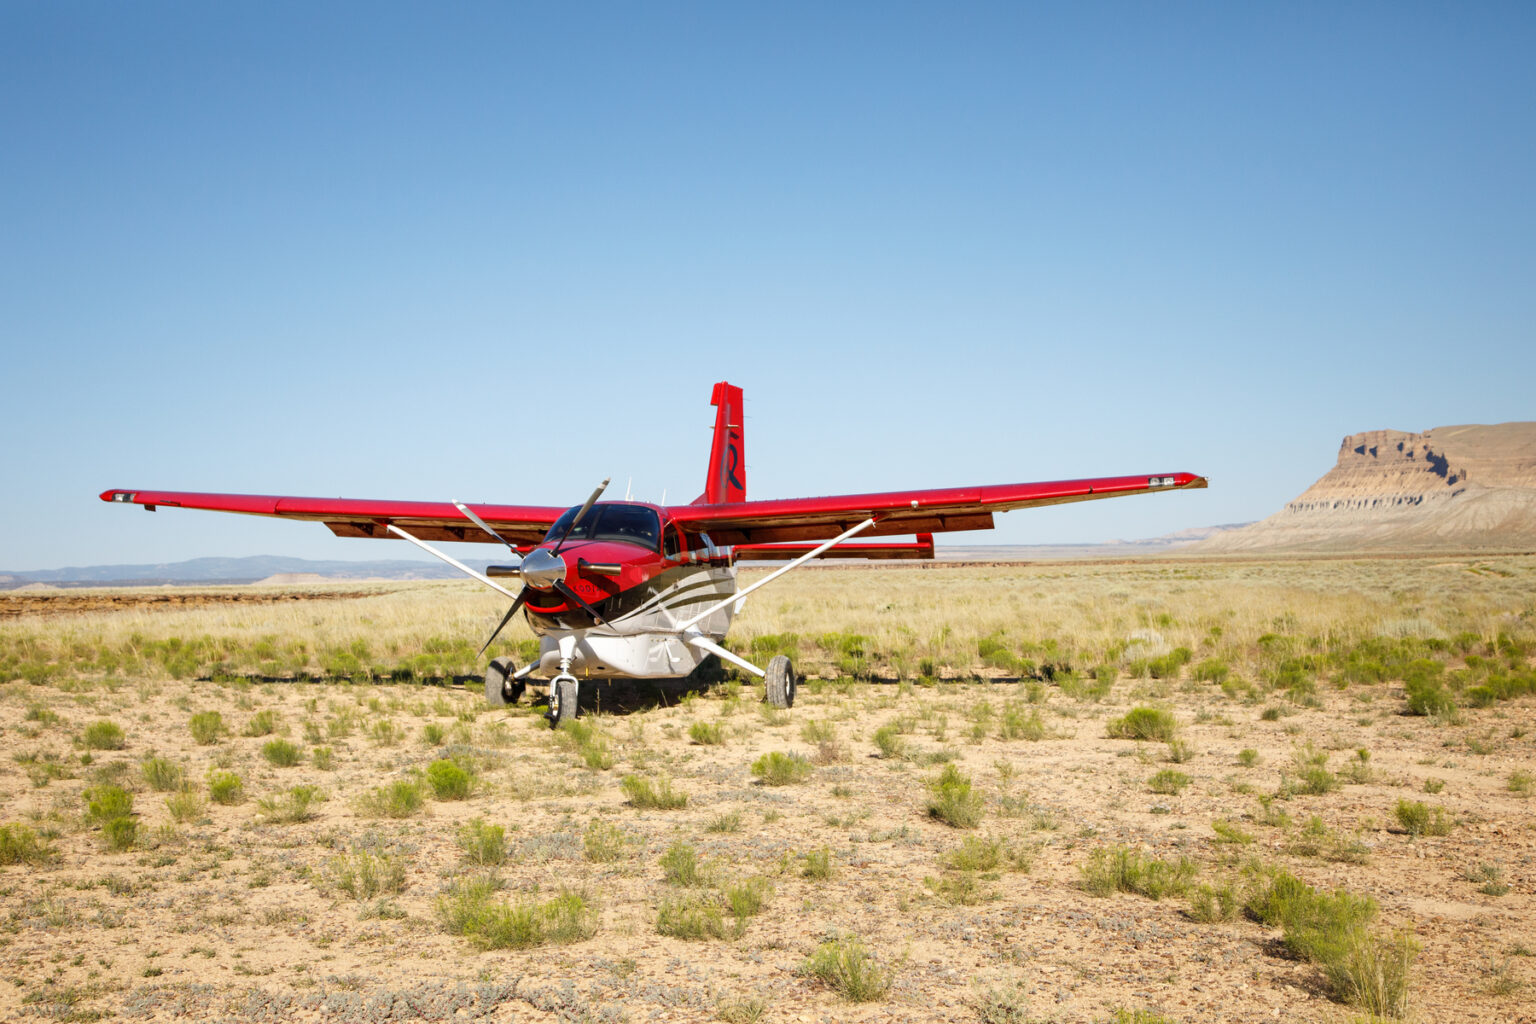 Air plane landed in the desert on an OARS Desolation Canyon trip